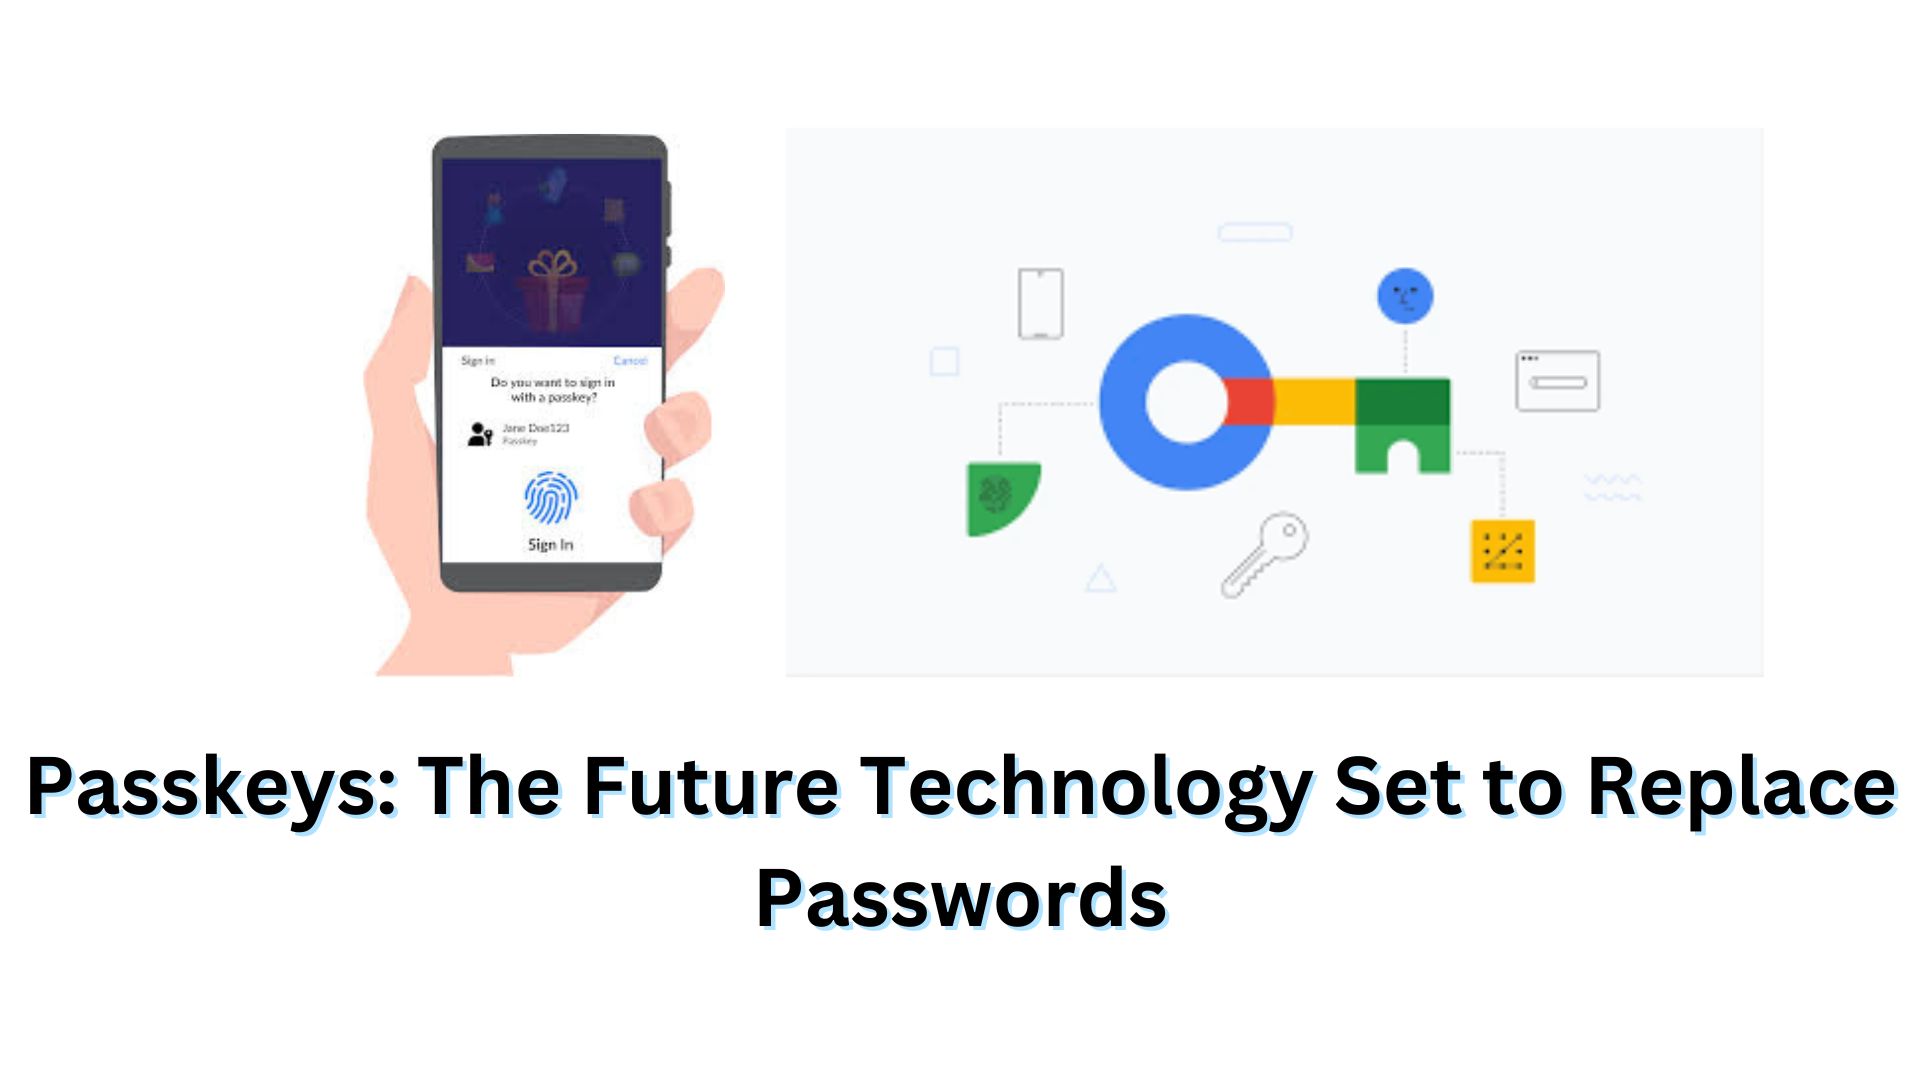 Passkeys: The Future Technology Set to Replace Passwords